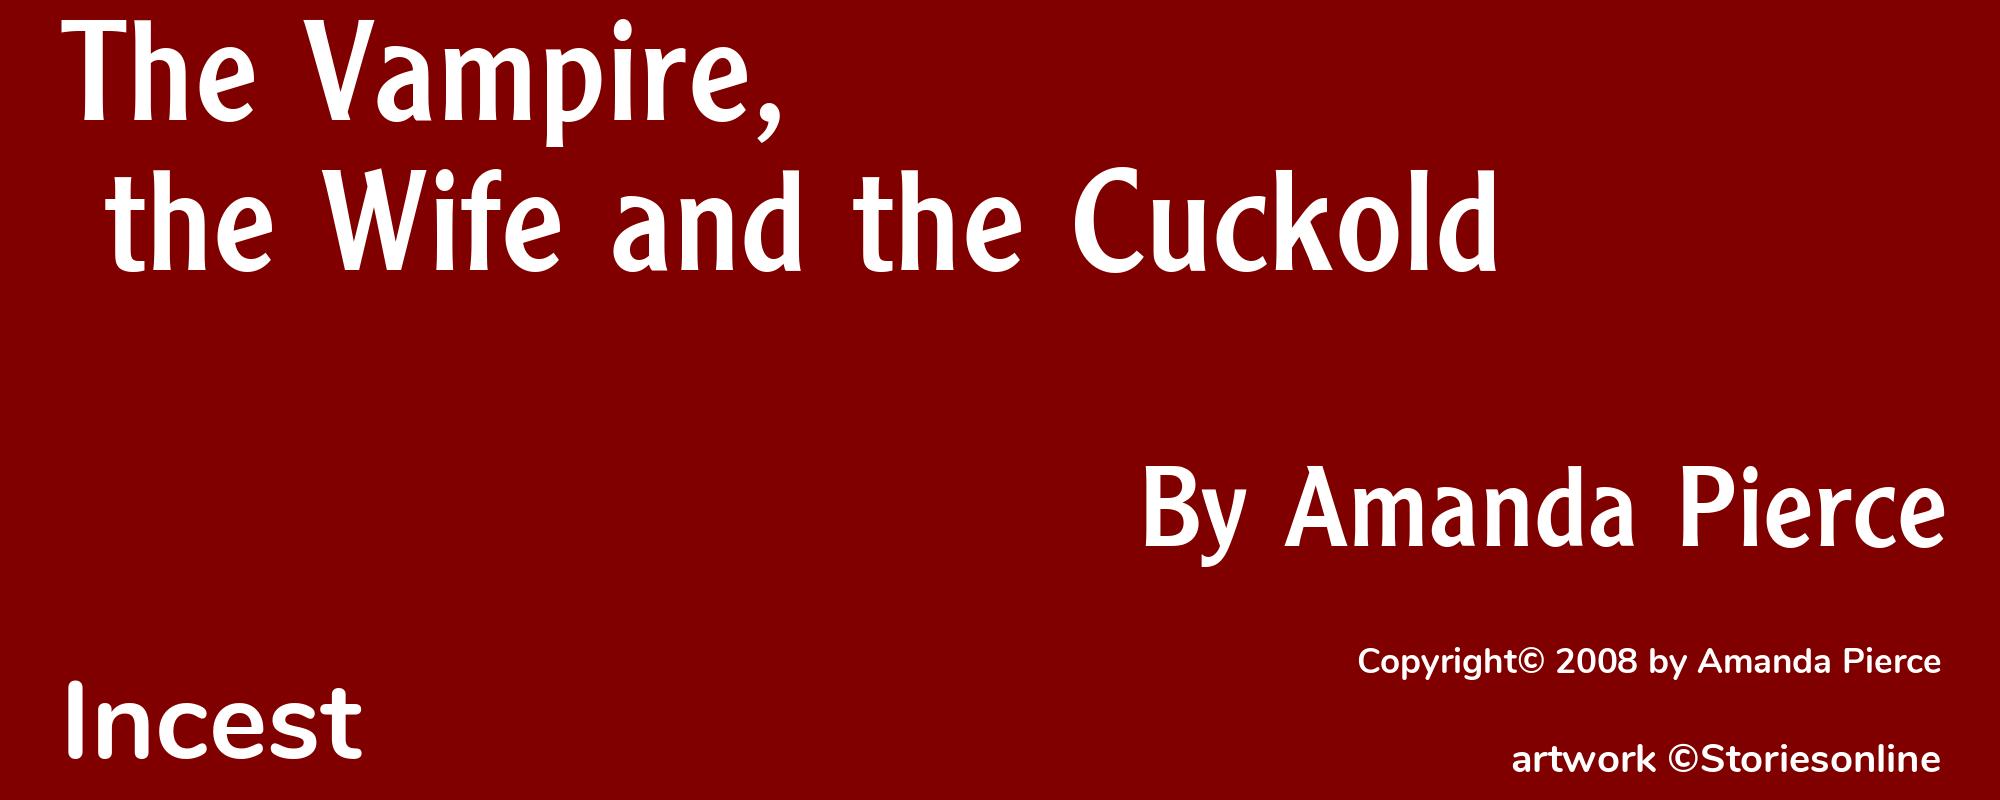 The Vampire, the Wife and the Cuckold - Cover